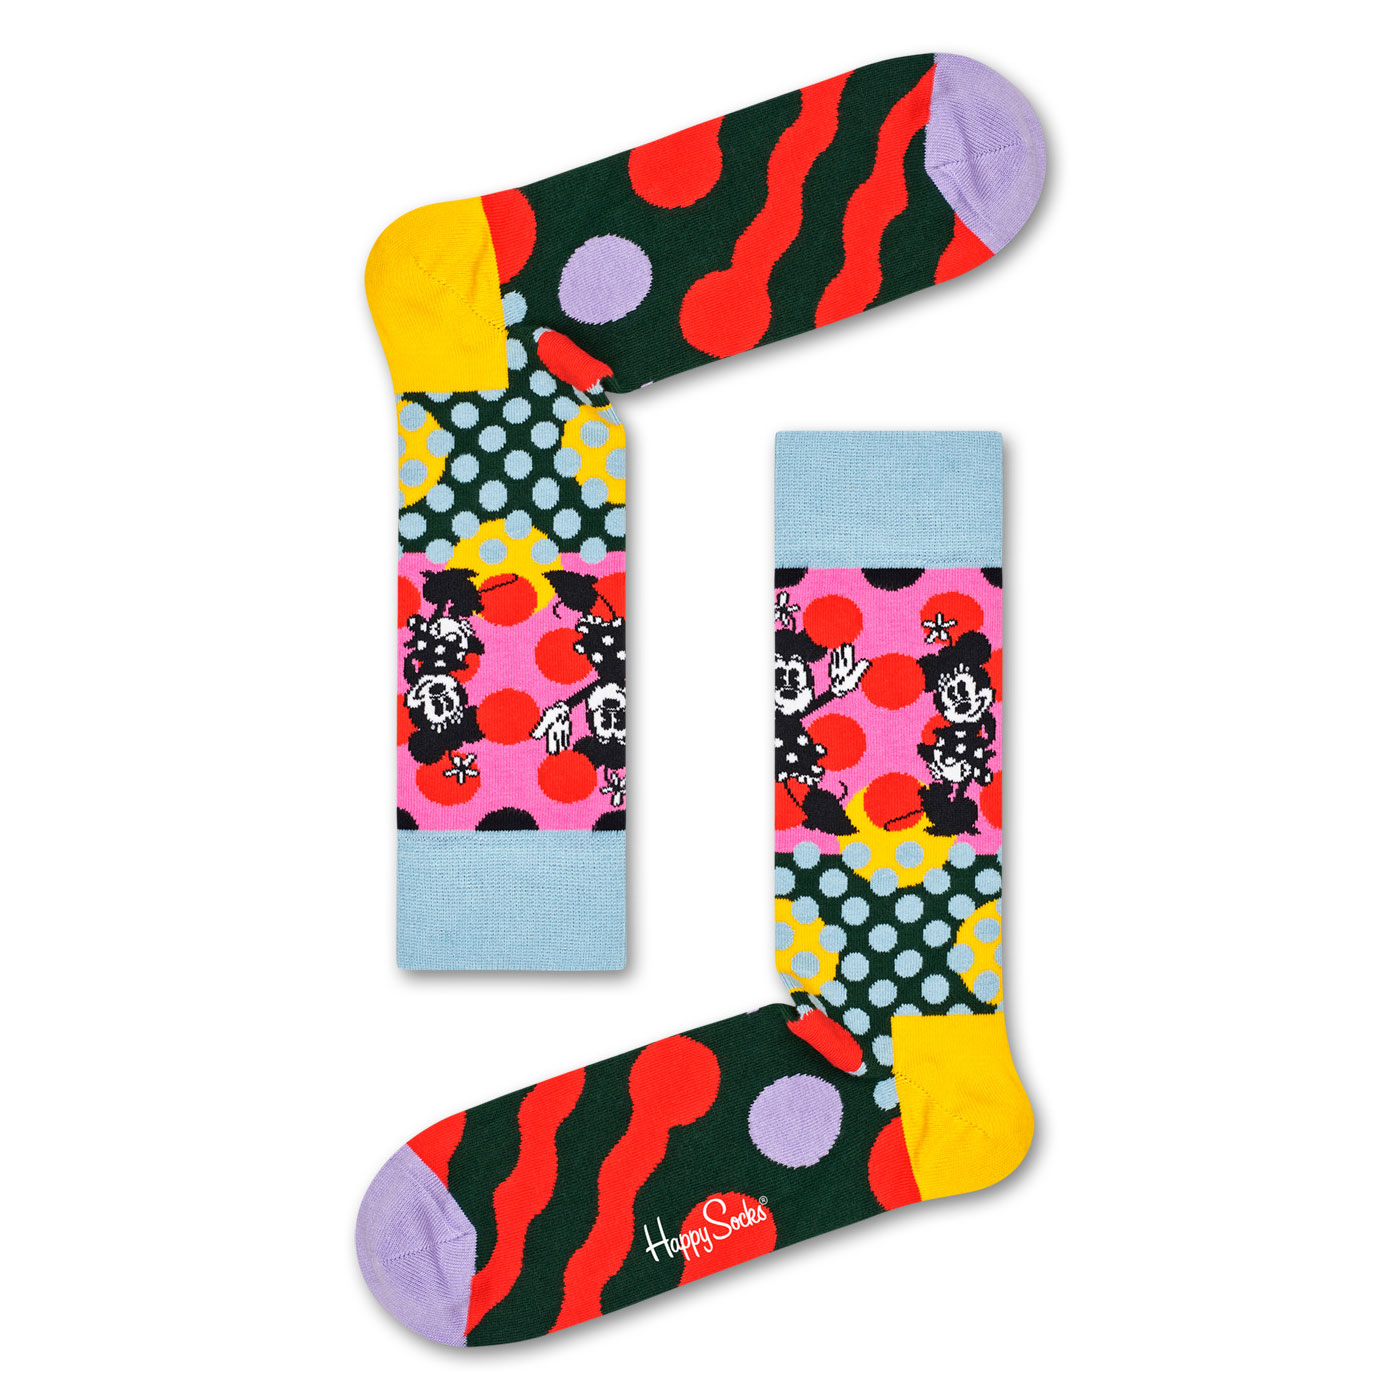 Disney Minnie-Time Sock(36-40) <img src="/banner_images/banner_0000000180.gif">